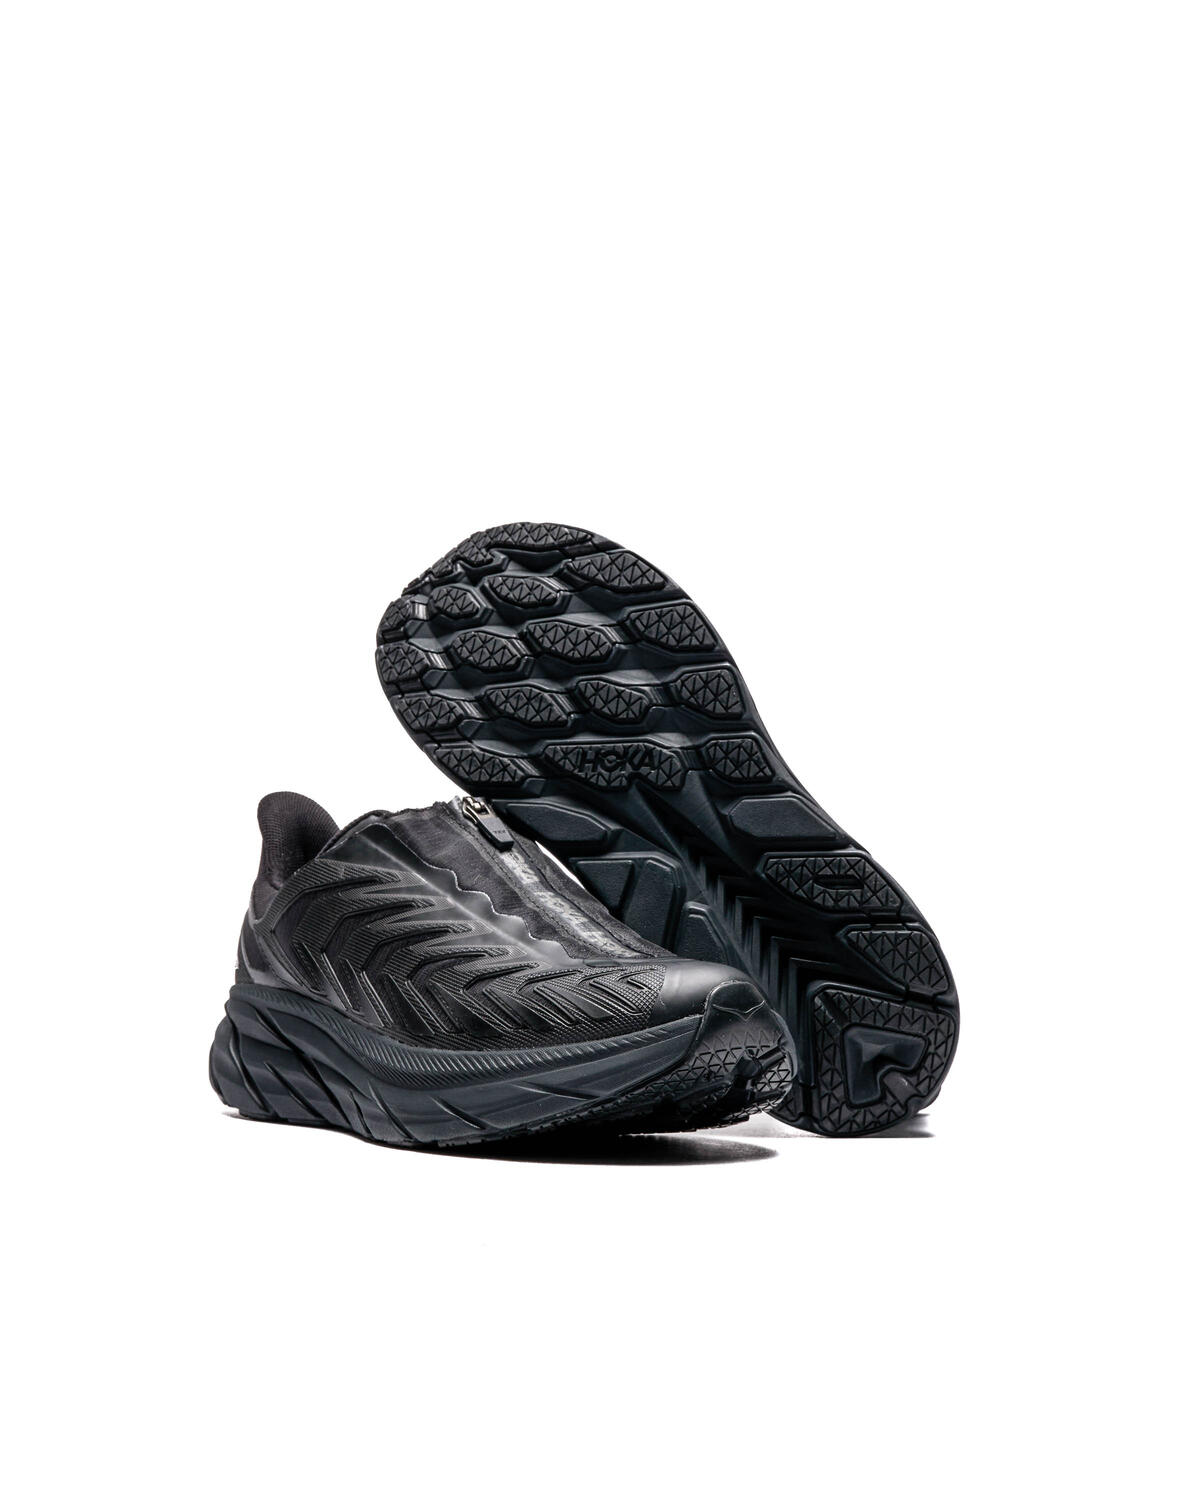 Hoka One One PROJECT CLIFTON | 1127924-BBLC | AFEW STORE